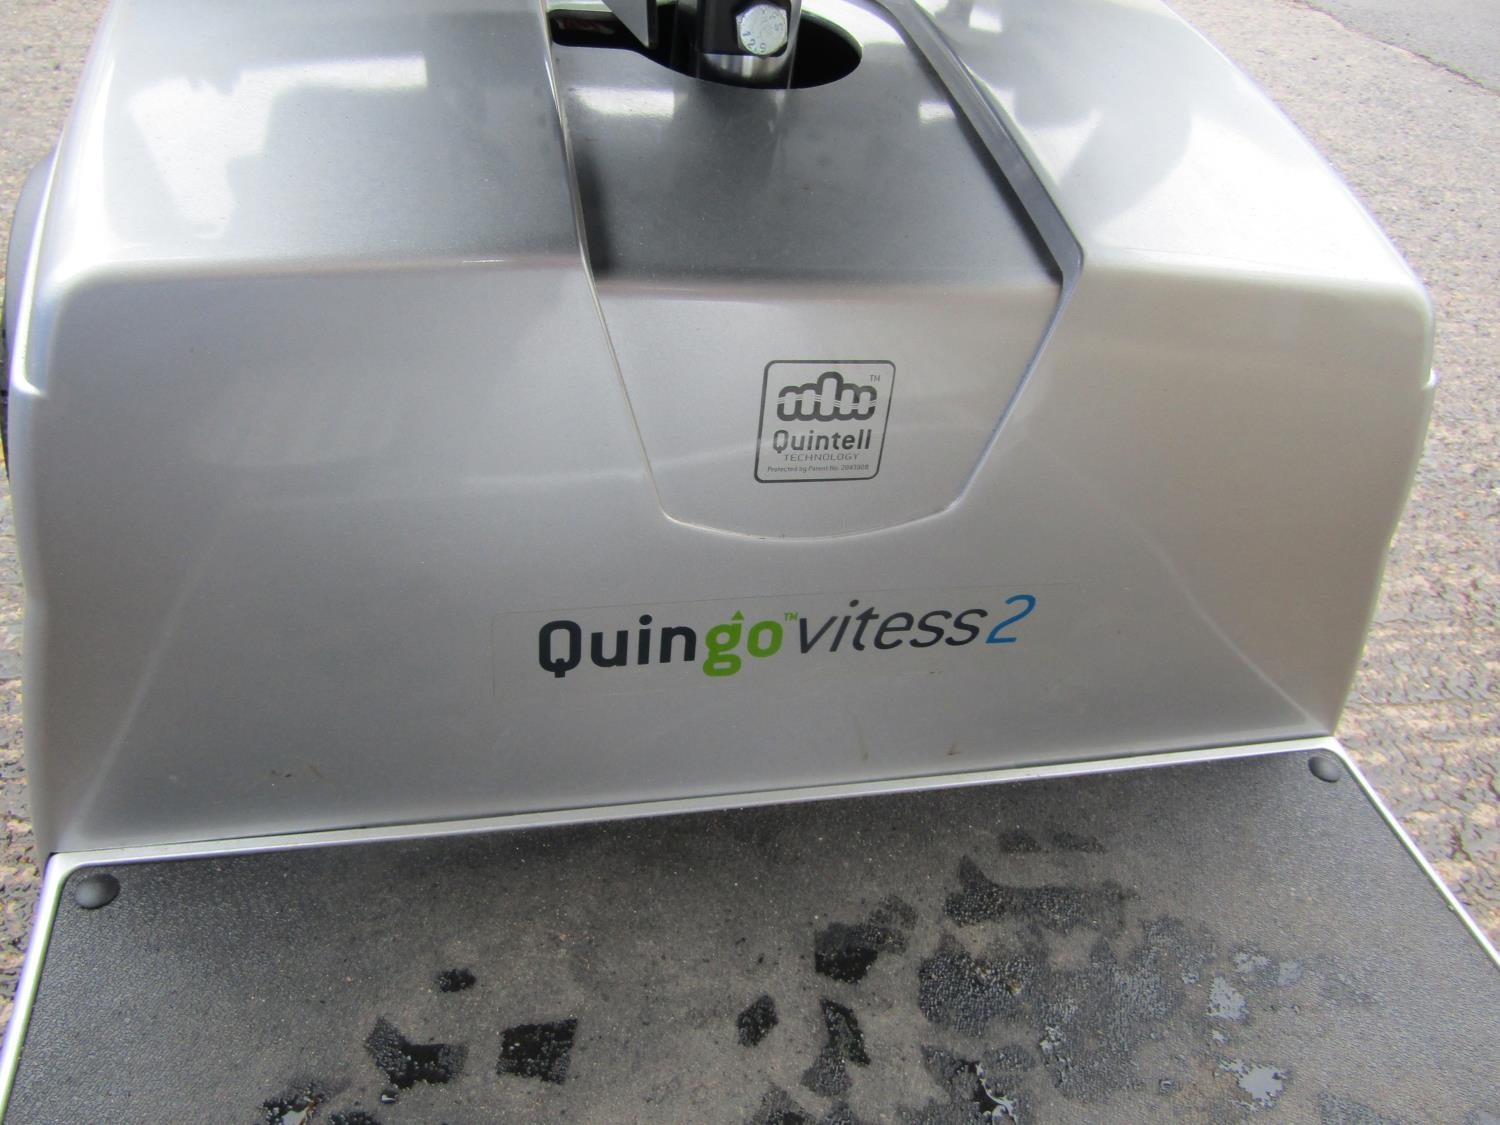 A Quingo Vitess II Mobility Scooter like new condition with only 17 hours on the clock, pair of - Image 12 of 12